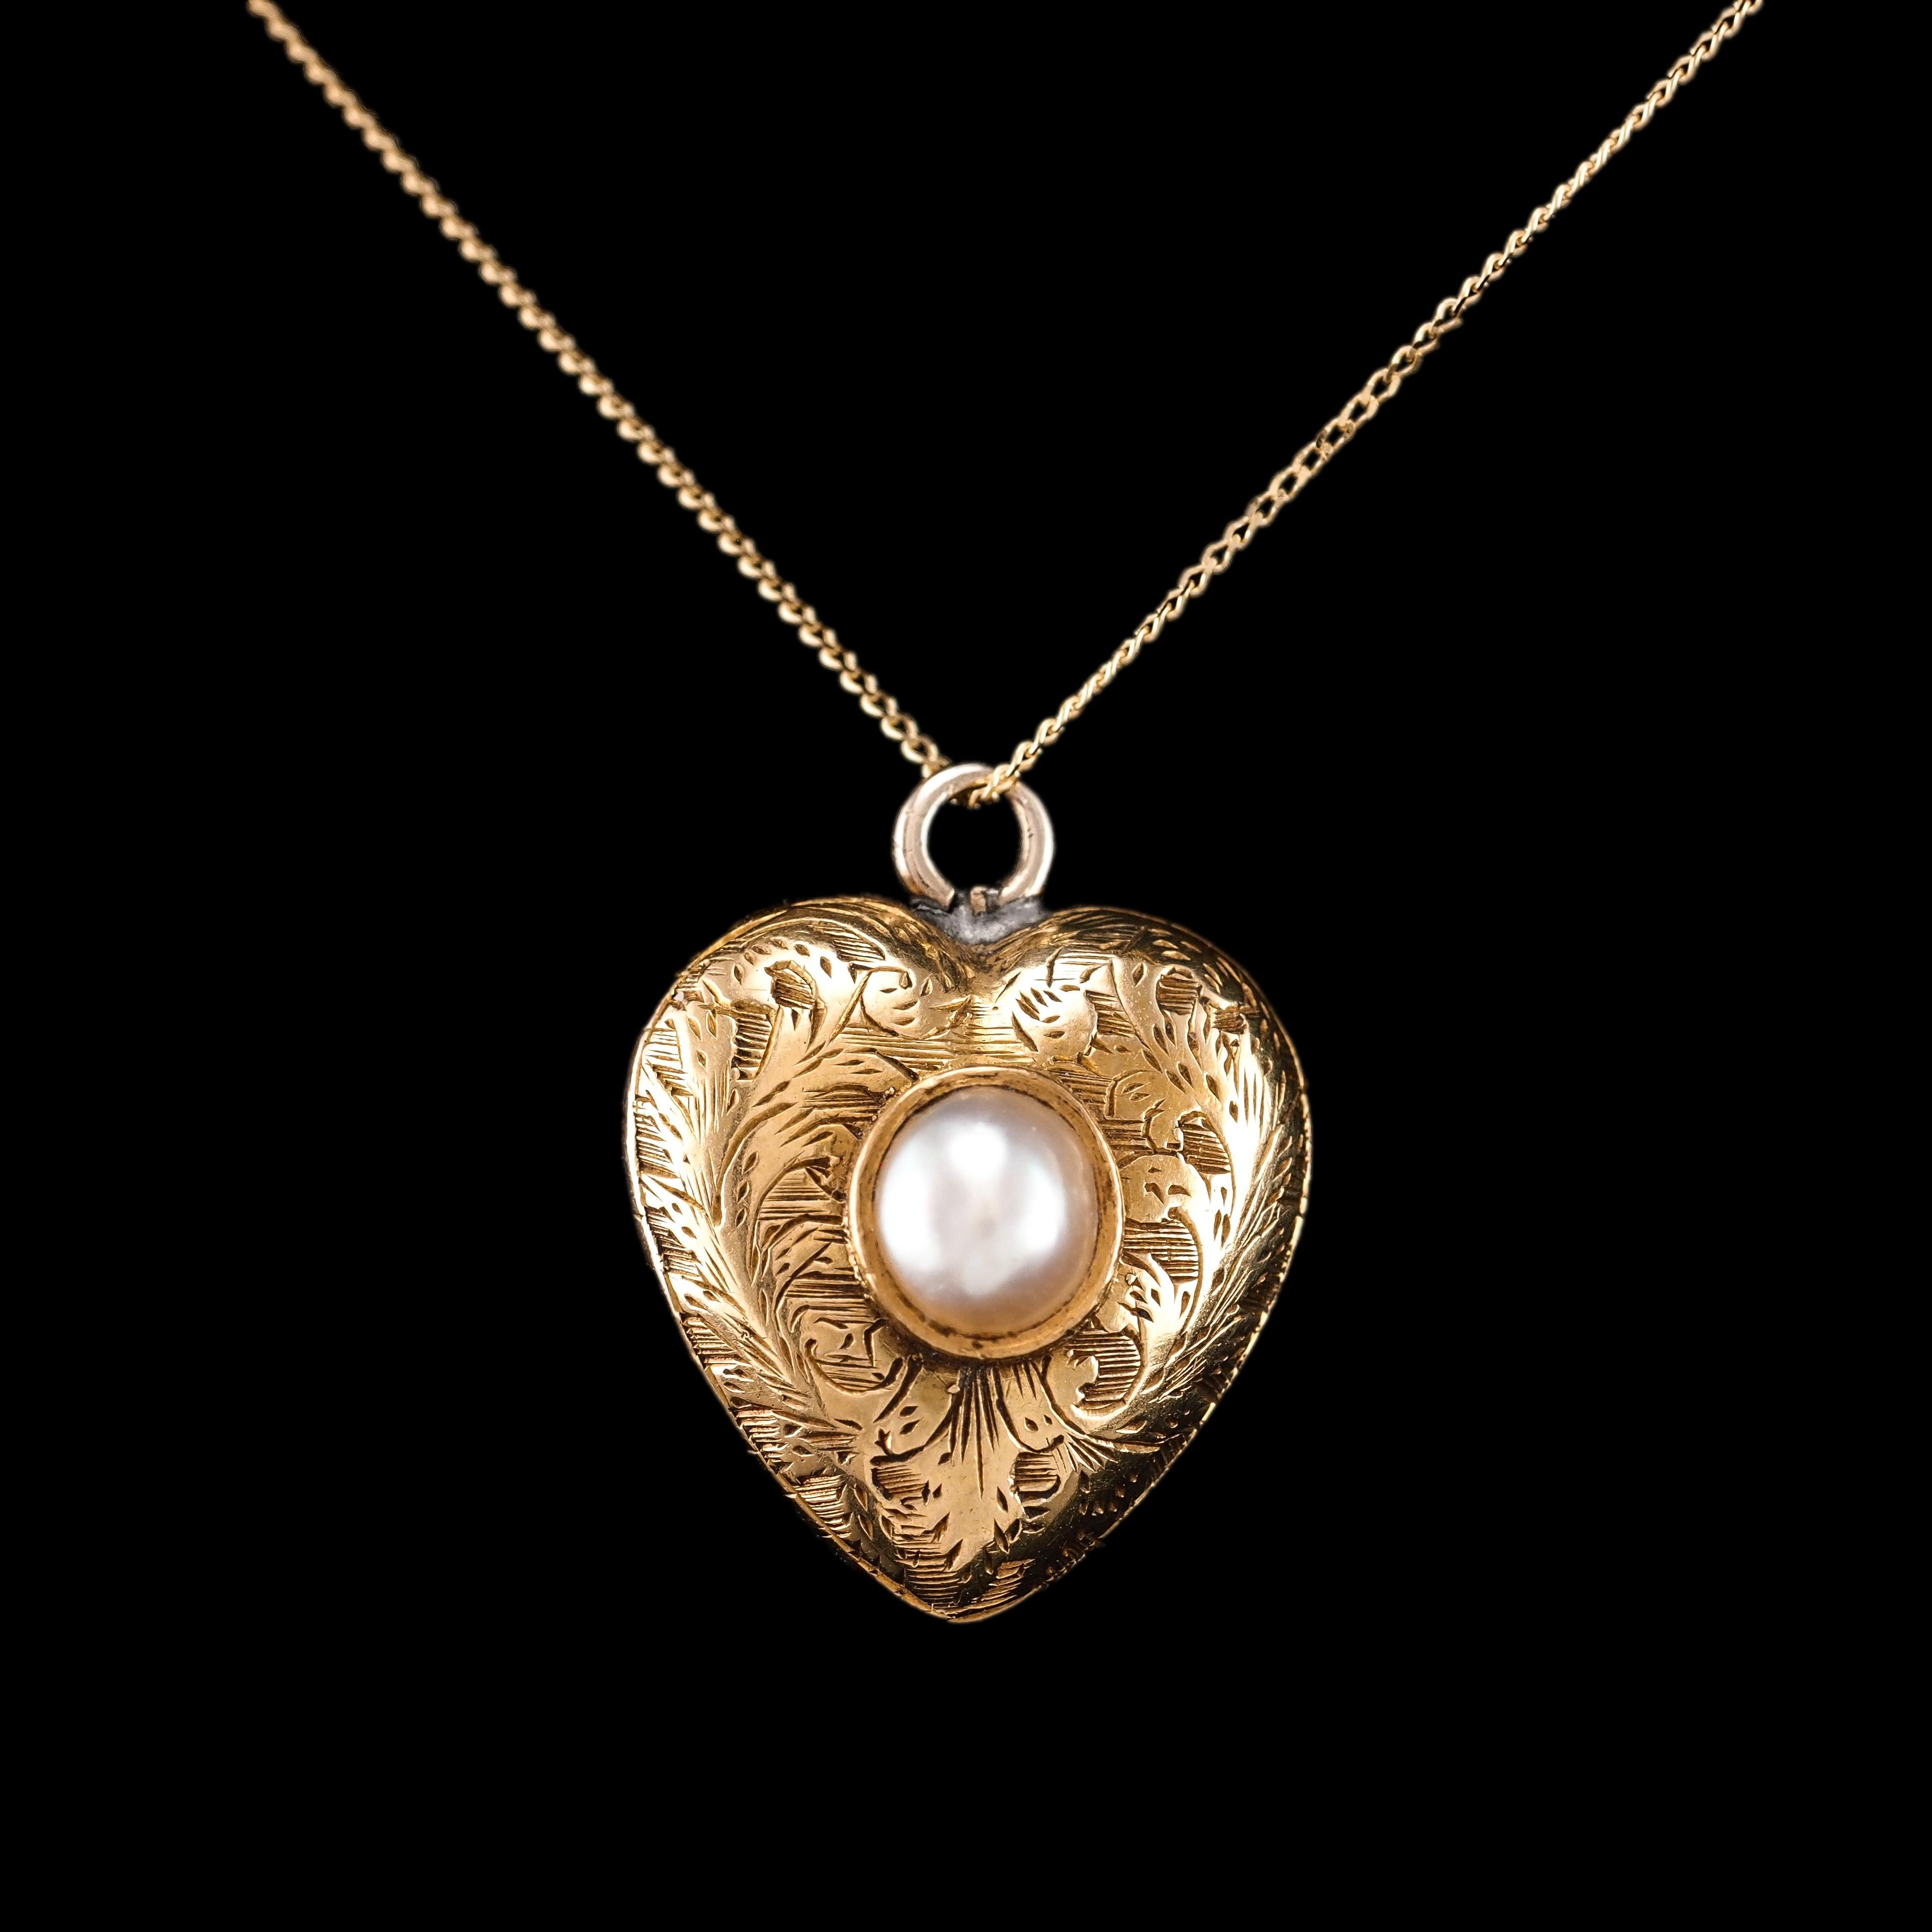 Welcome to Artisan Antiques based in Mayfair, London - We are delighted to offer this lovely antique 18ct gold 'puffy' heart-shaped charm/pendant locket made in the Victorian era c.1890.

Price negotiations may be possible under certain criteria,